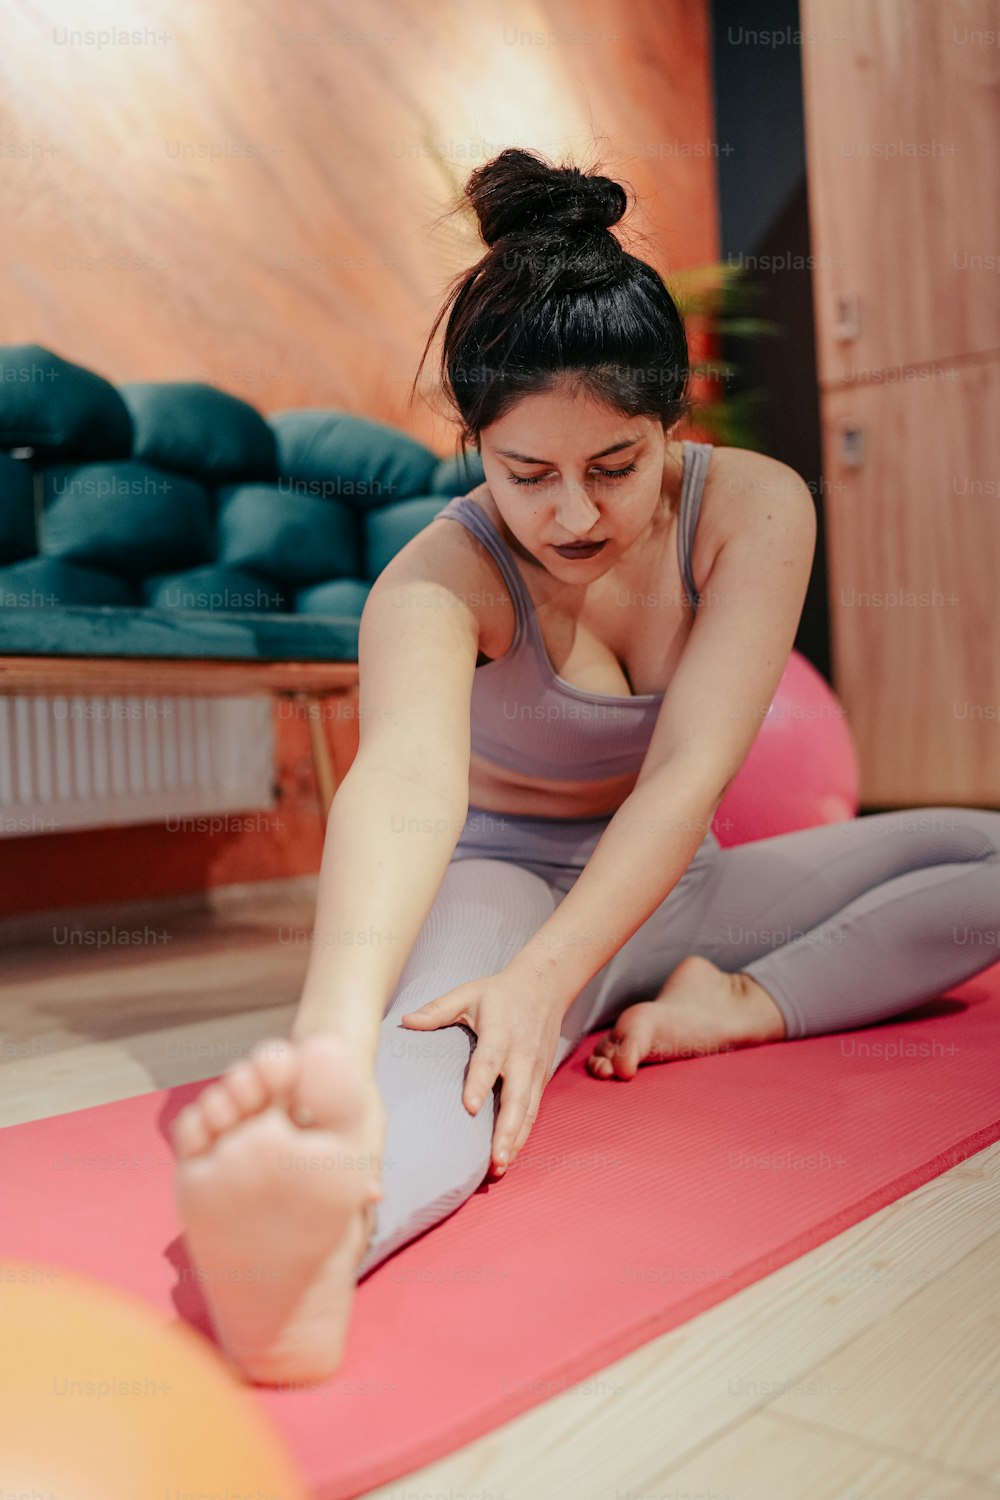 a woman sitting on a yoga mat stretching her legs